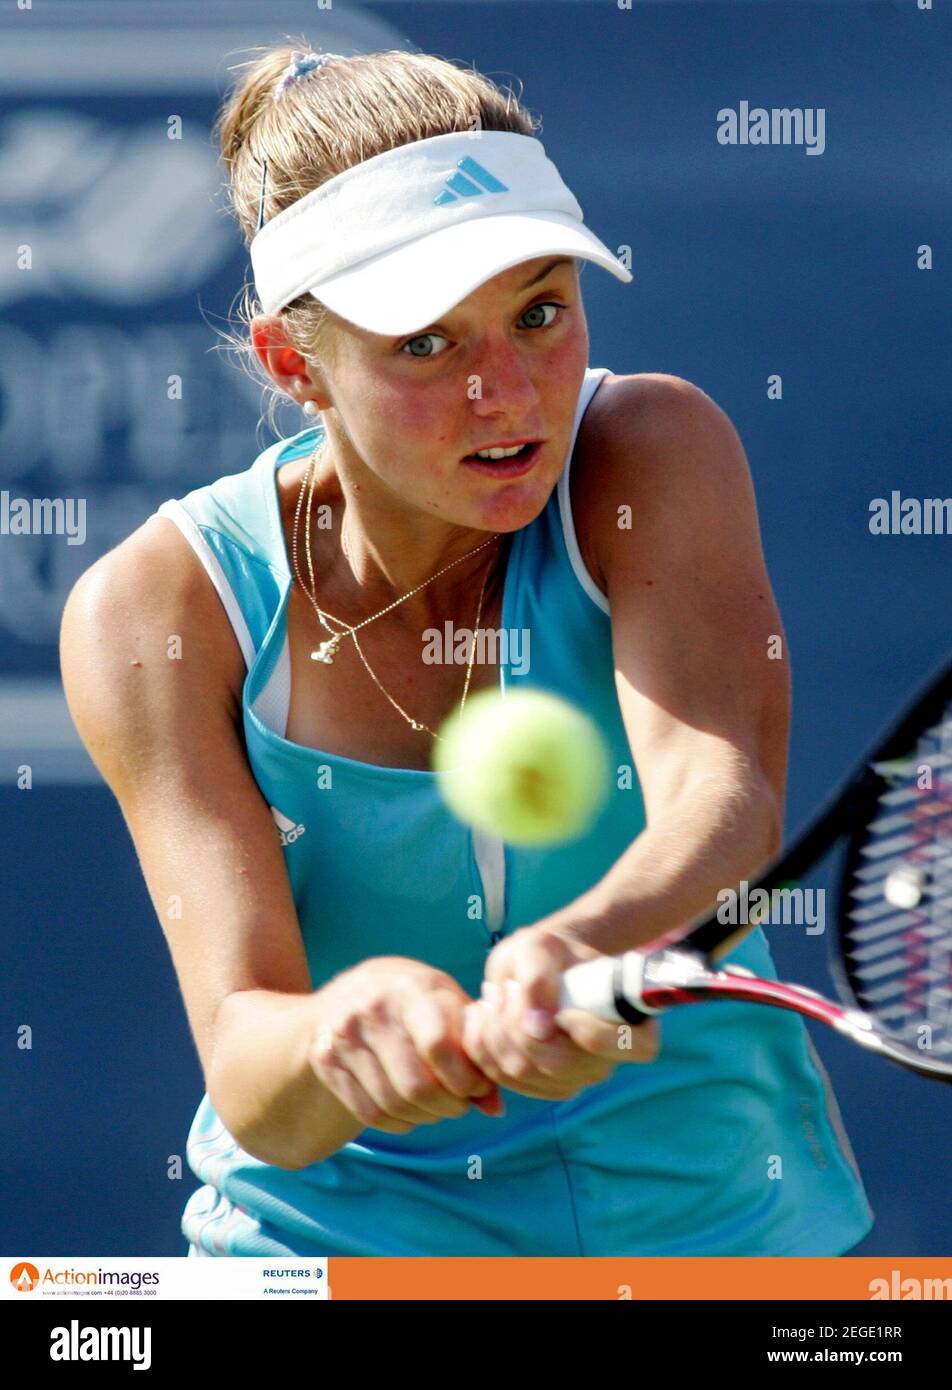 Tennis - Rogers Cup, Sony Ericsson WTA Tour - Montreal, Canada - 18/8/06  Anna Chakvetadze of Russia returns a shot to Shahar Peer of Israe  Mandatory Credit: Action Images / Chris Wattie  Livepic Stock Photo